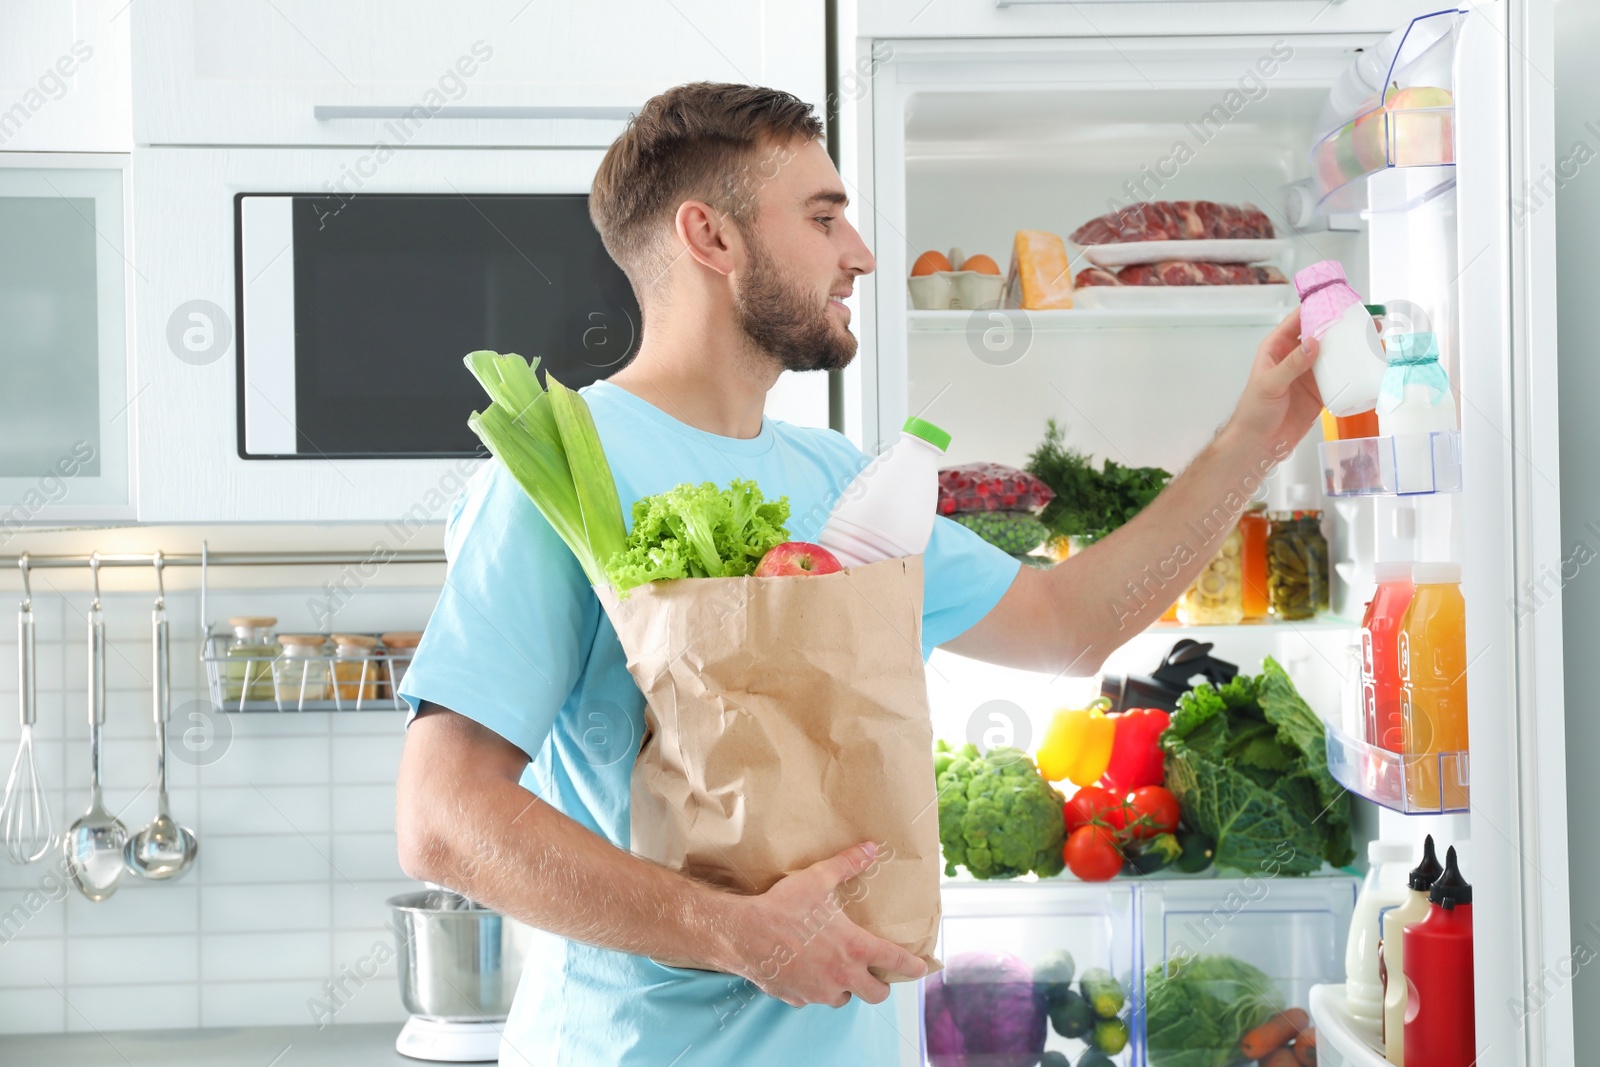 Photo of Man with paper bag putting products into refrigerator in kitchen